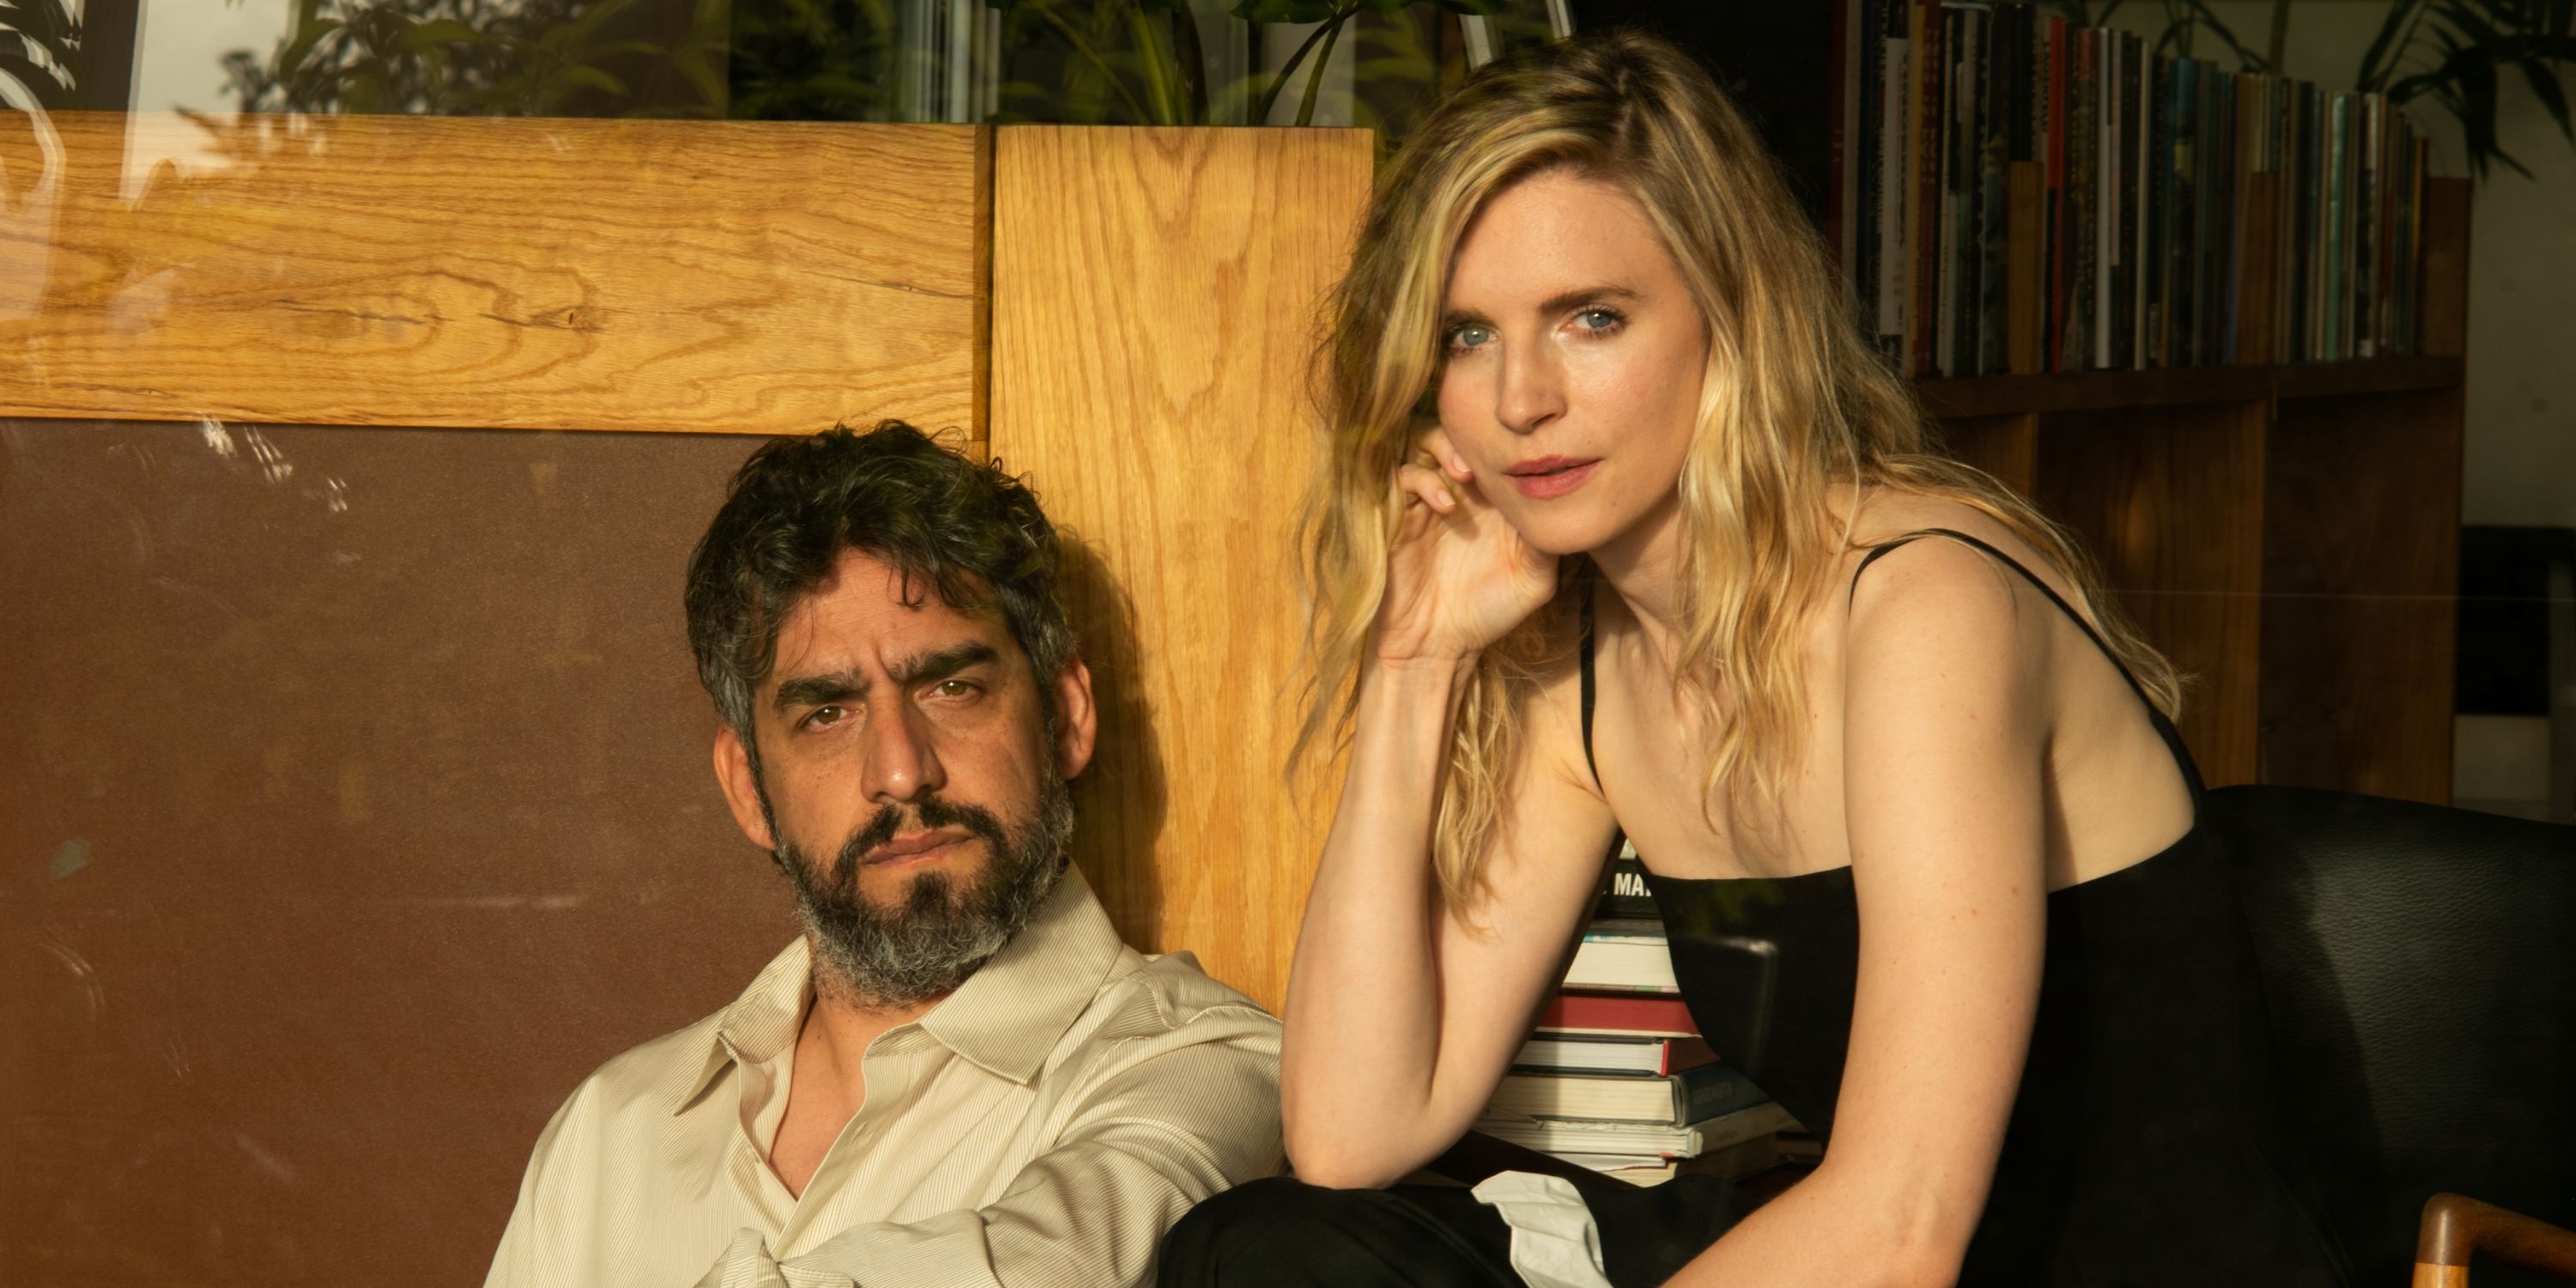 A Murder at the End of the World co-creators, writers, directors and executive producers Brit Marling, who also plays Lee, and Zal Batmanglij